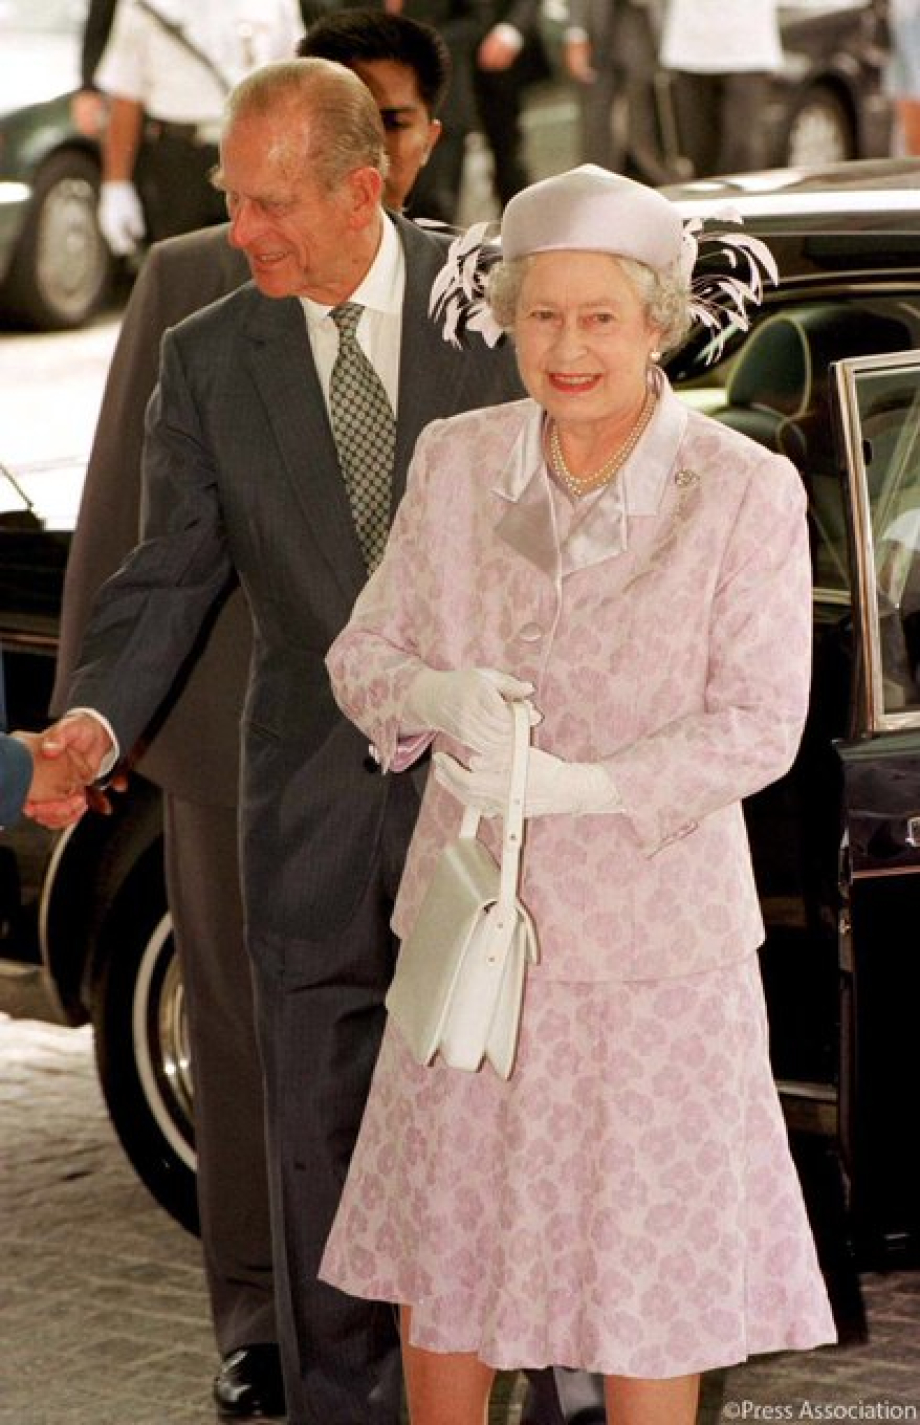 The Queen and The Duke of Edinburgh attend the 1998 Commonwealth Games in Malaysia 